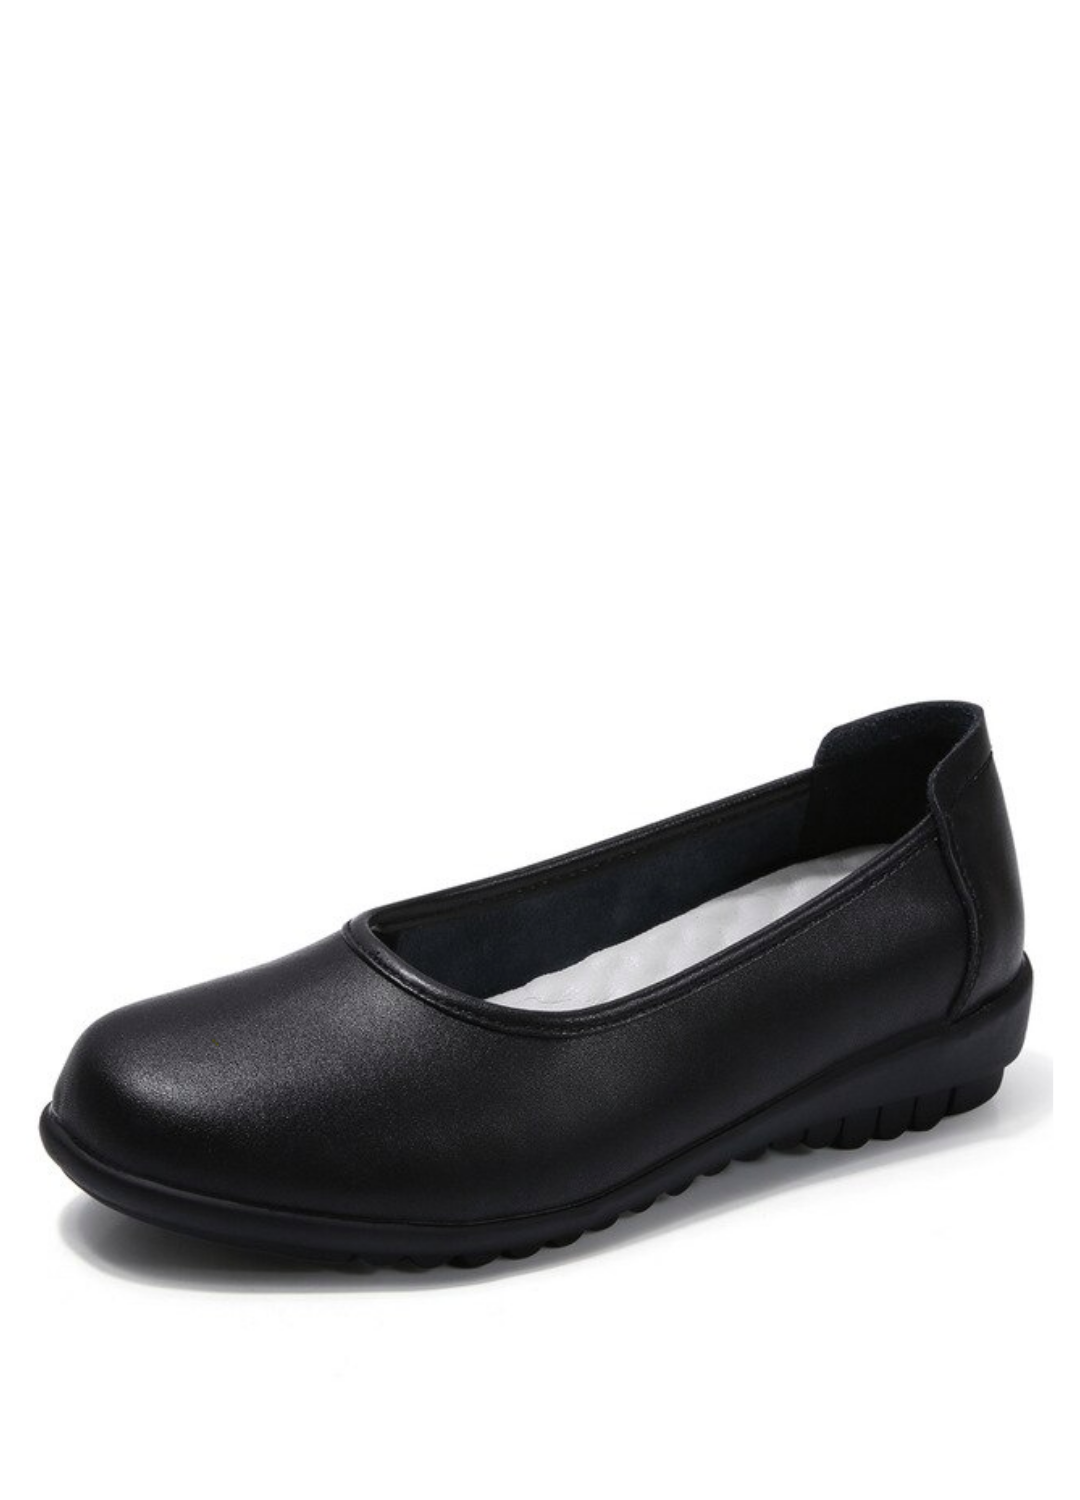 Ivy Women's Loafer Shoes | Ultrasellershoes.com – USS® Shoes